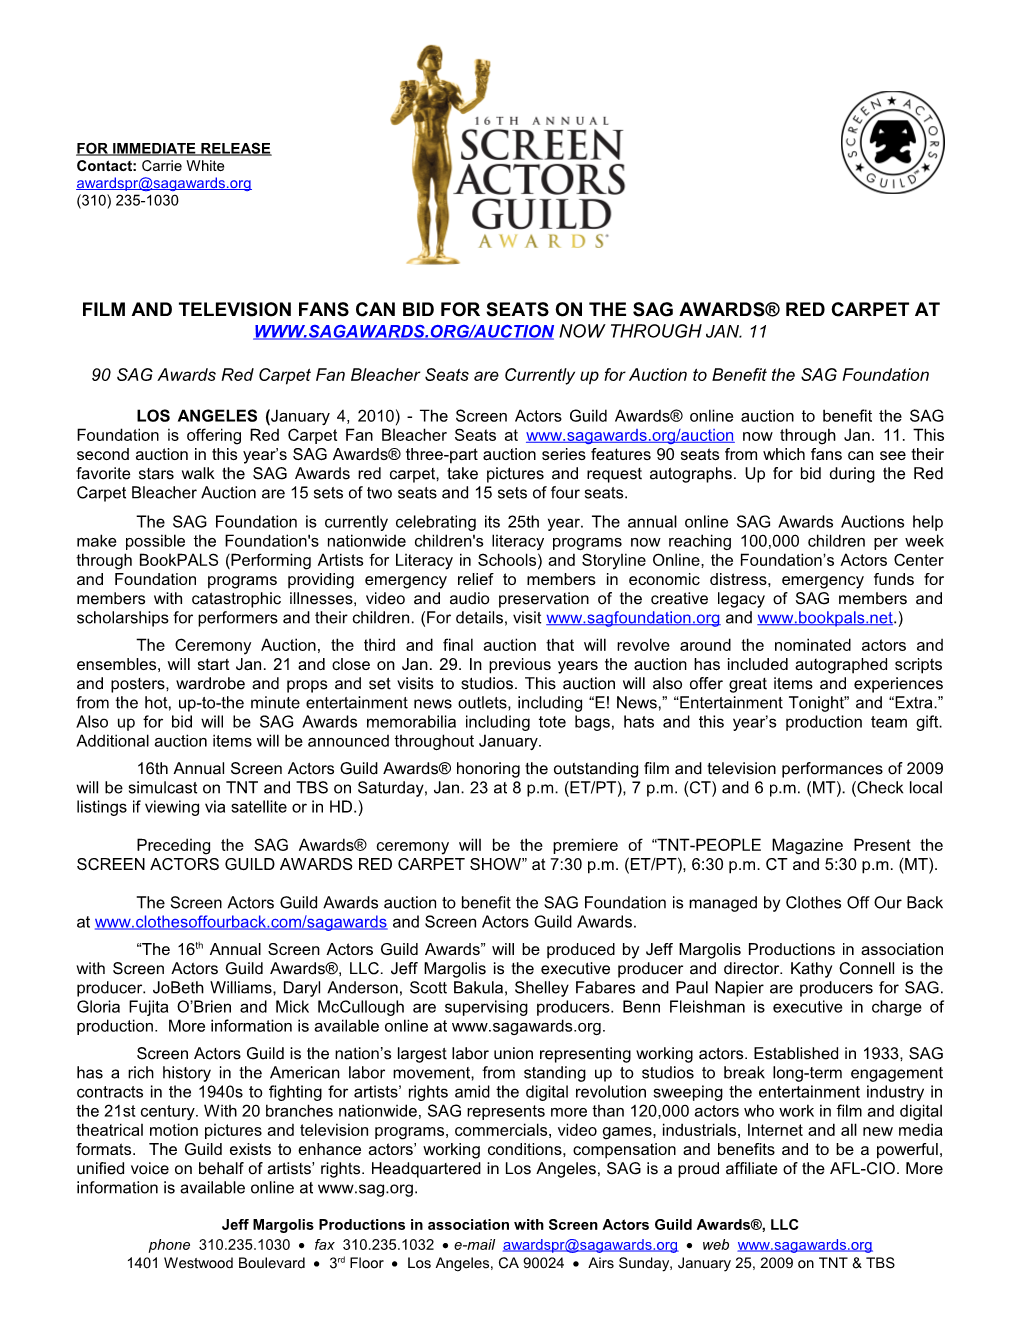 Film and Television Fans CAN BID for SEATS on the Sag Awards Red Carpet at THROUGHJAN